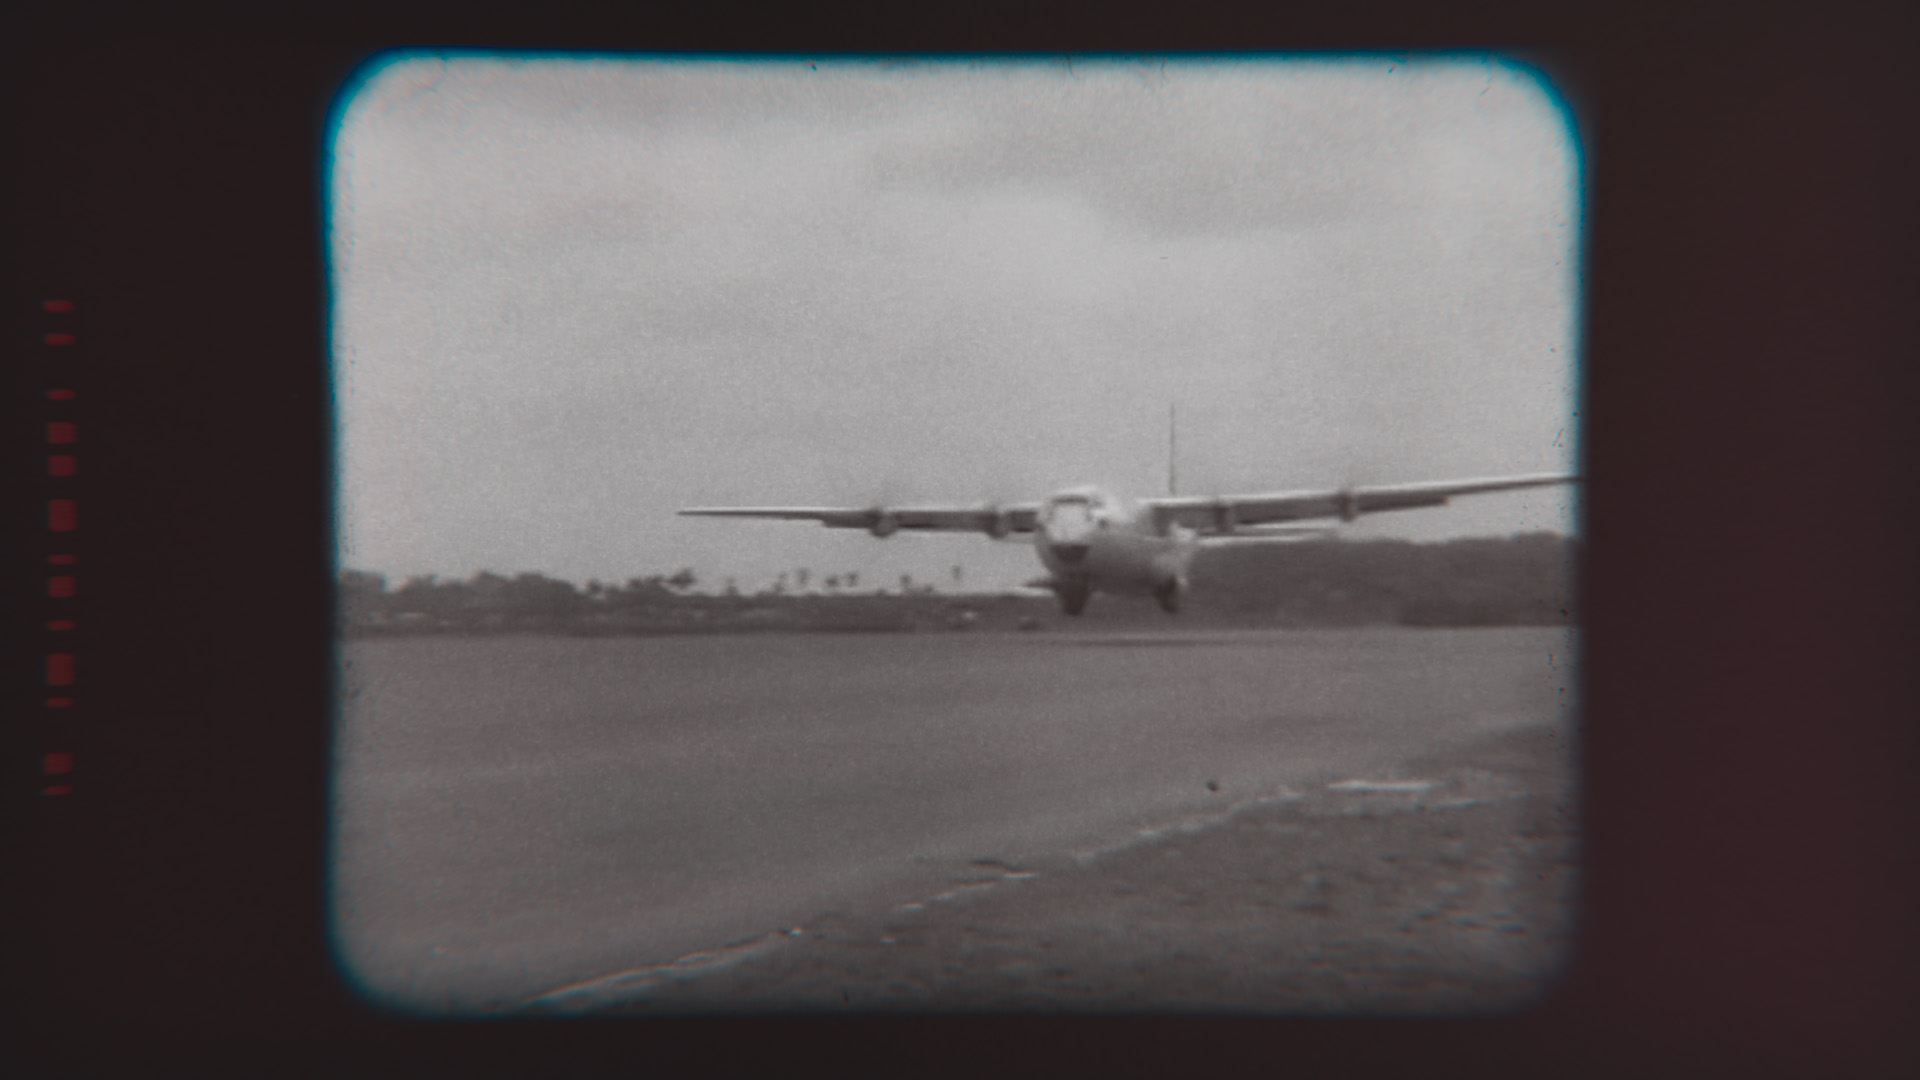 Archival Footage of a C-130